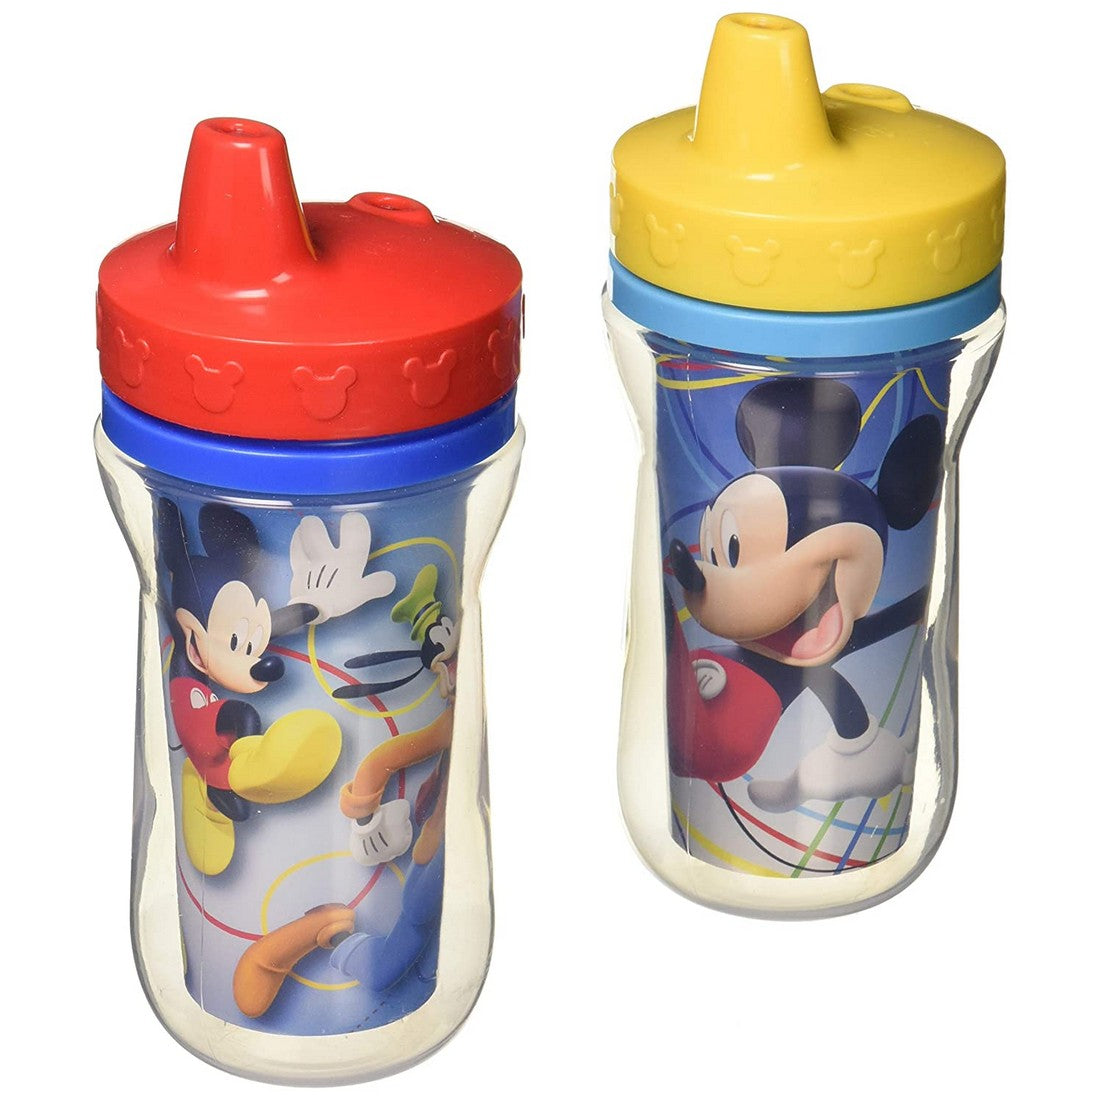 The First Years Insulated 9 oz Sippy Cup 2Pk Cups & Sipper Red & Yellow 9M to 12M